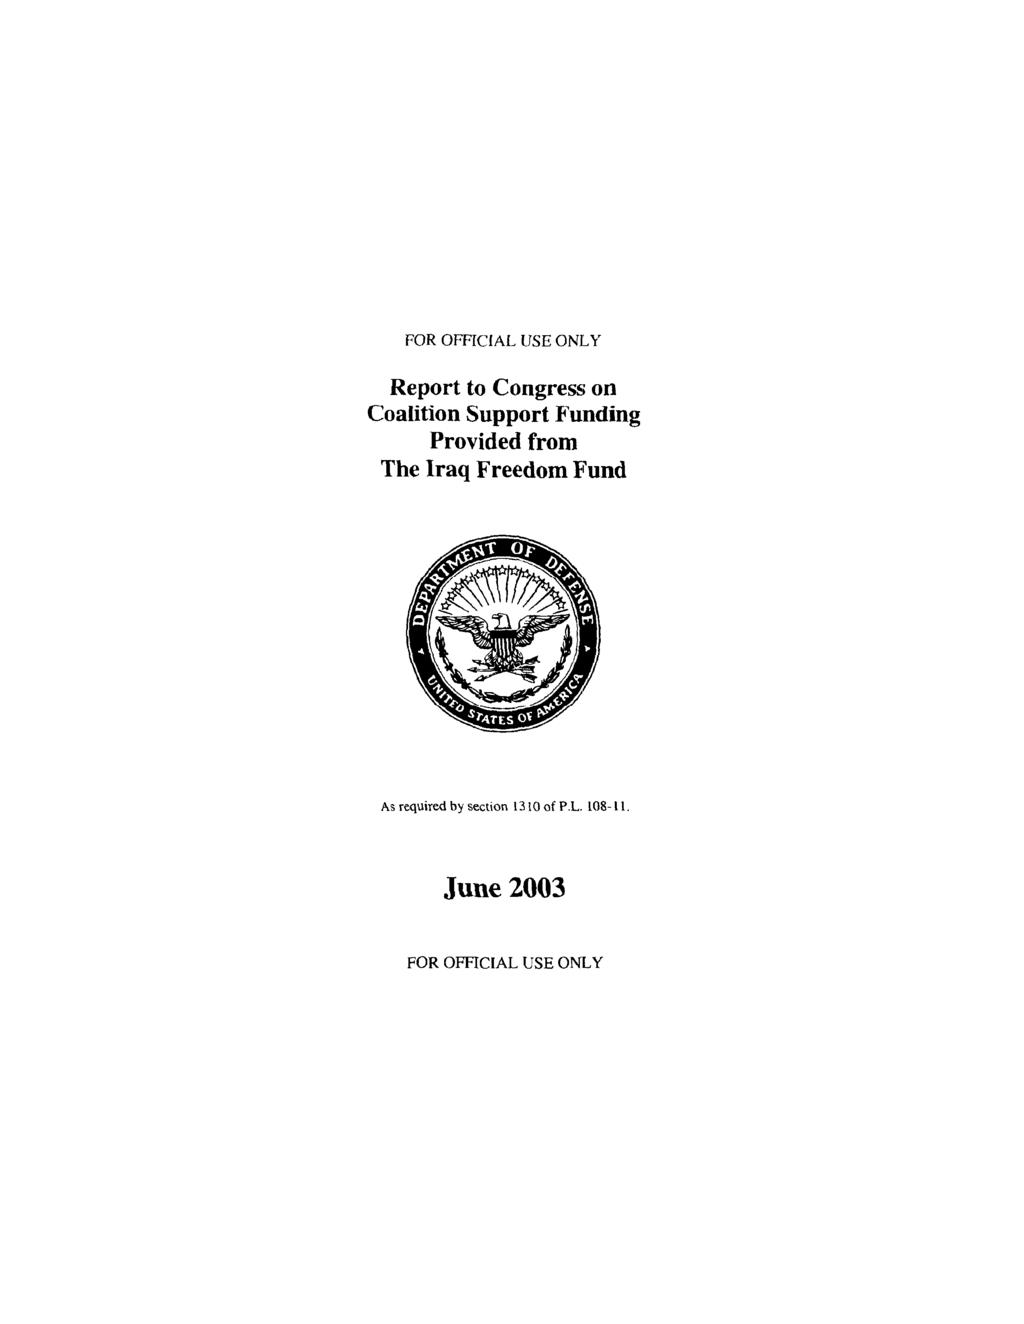 FOR OFFICIAL USE ONLY Report to Congress on Coalition Support Funding Provided from The